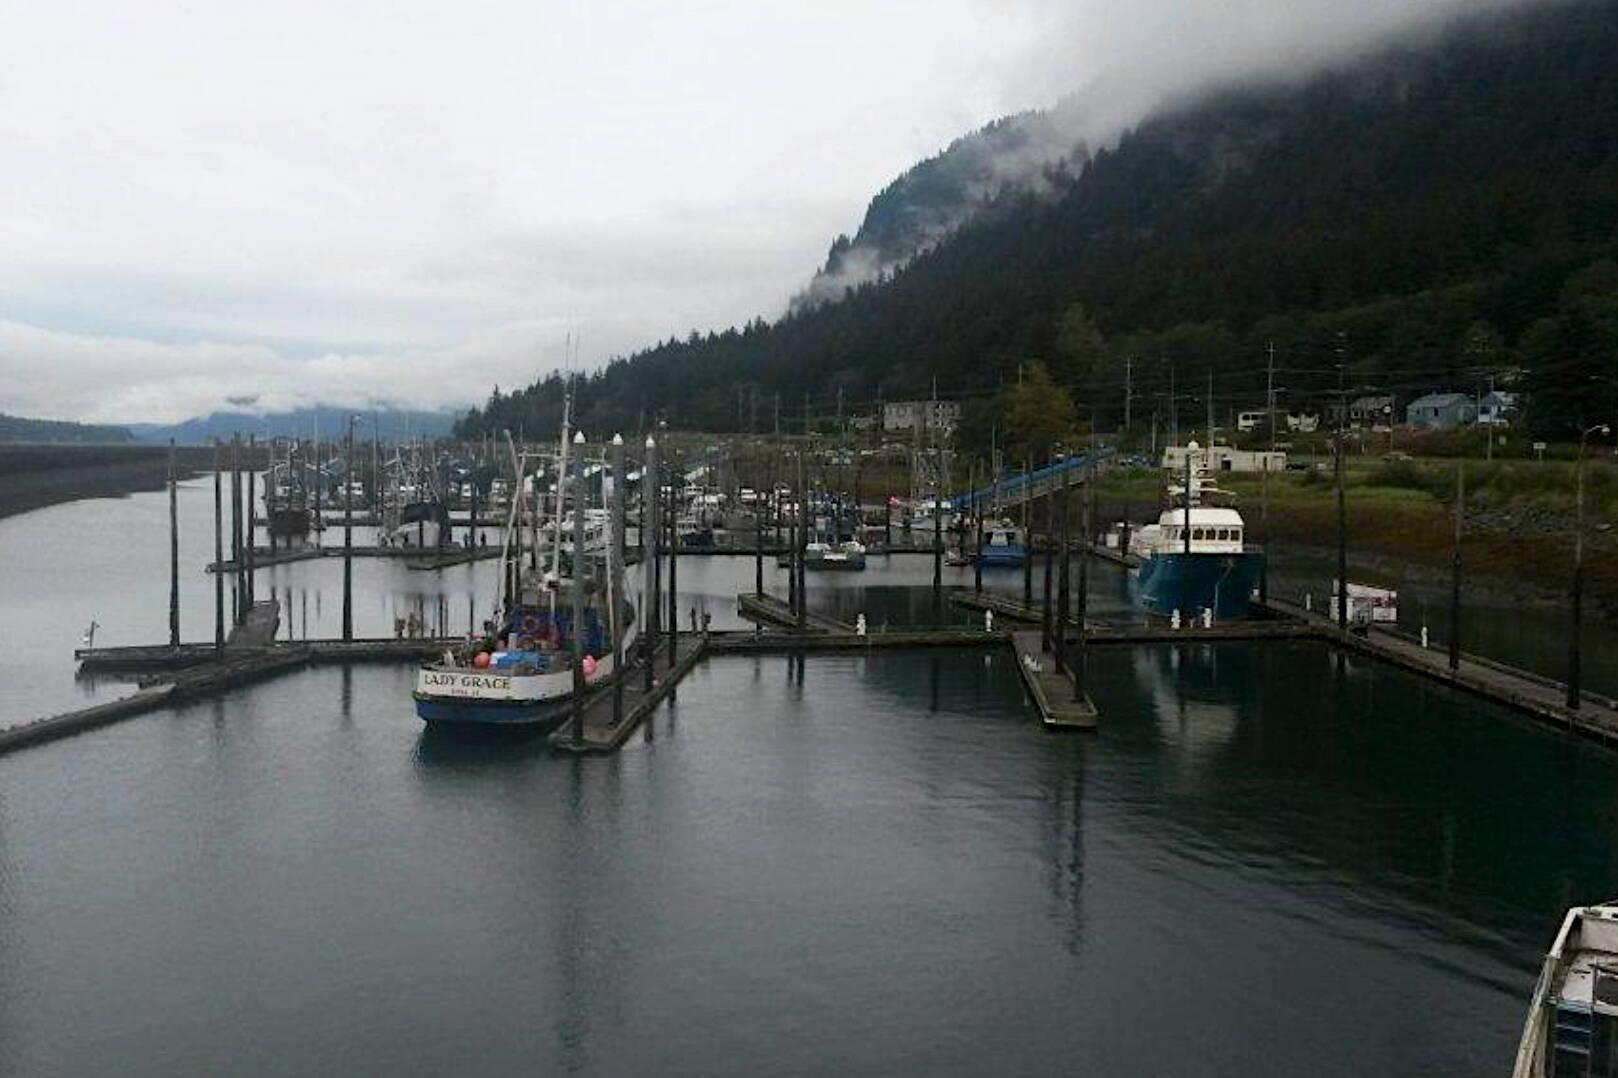 Aurora Harbor is where a Tennessee fugitive wanted for child rape and related charges was staying on a houseboat when he was apprehended by U.S. Marshals last week. (City and Borough of Juneau photo)